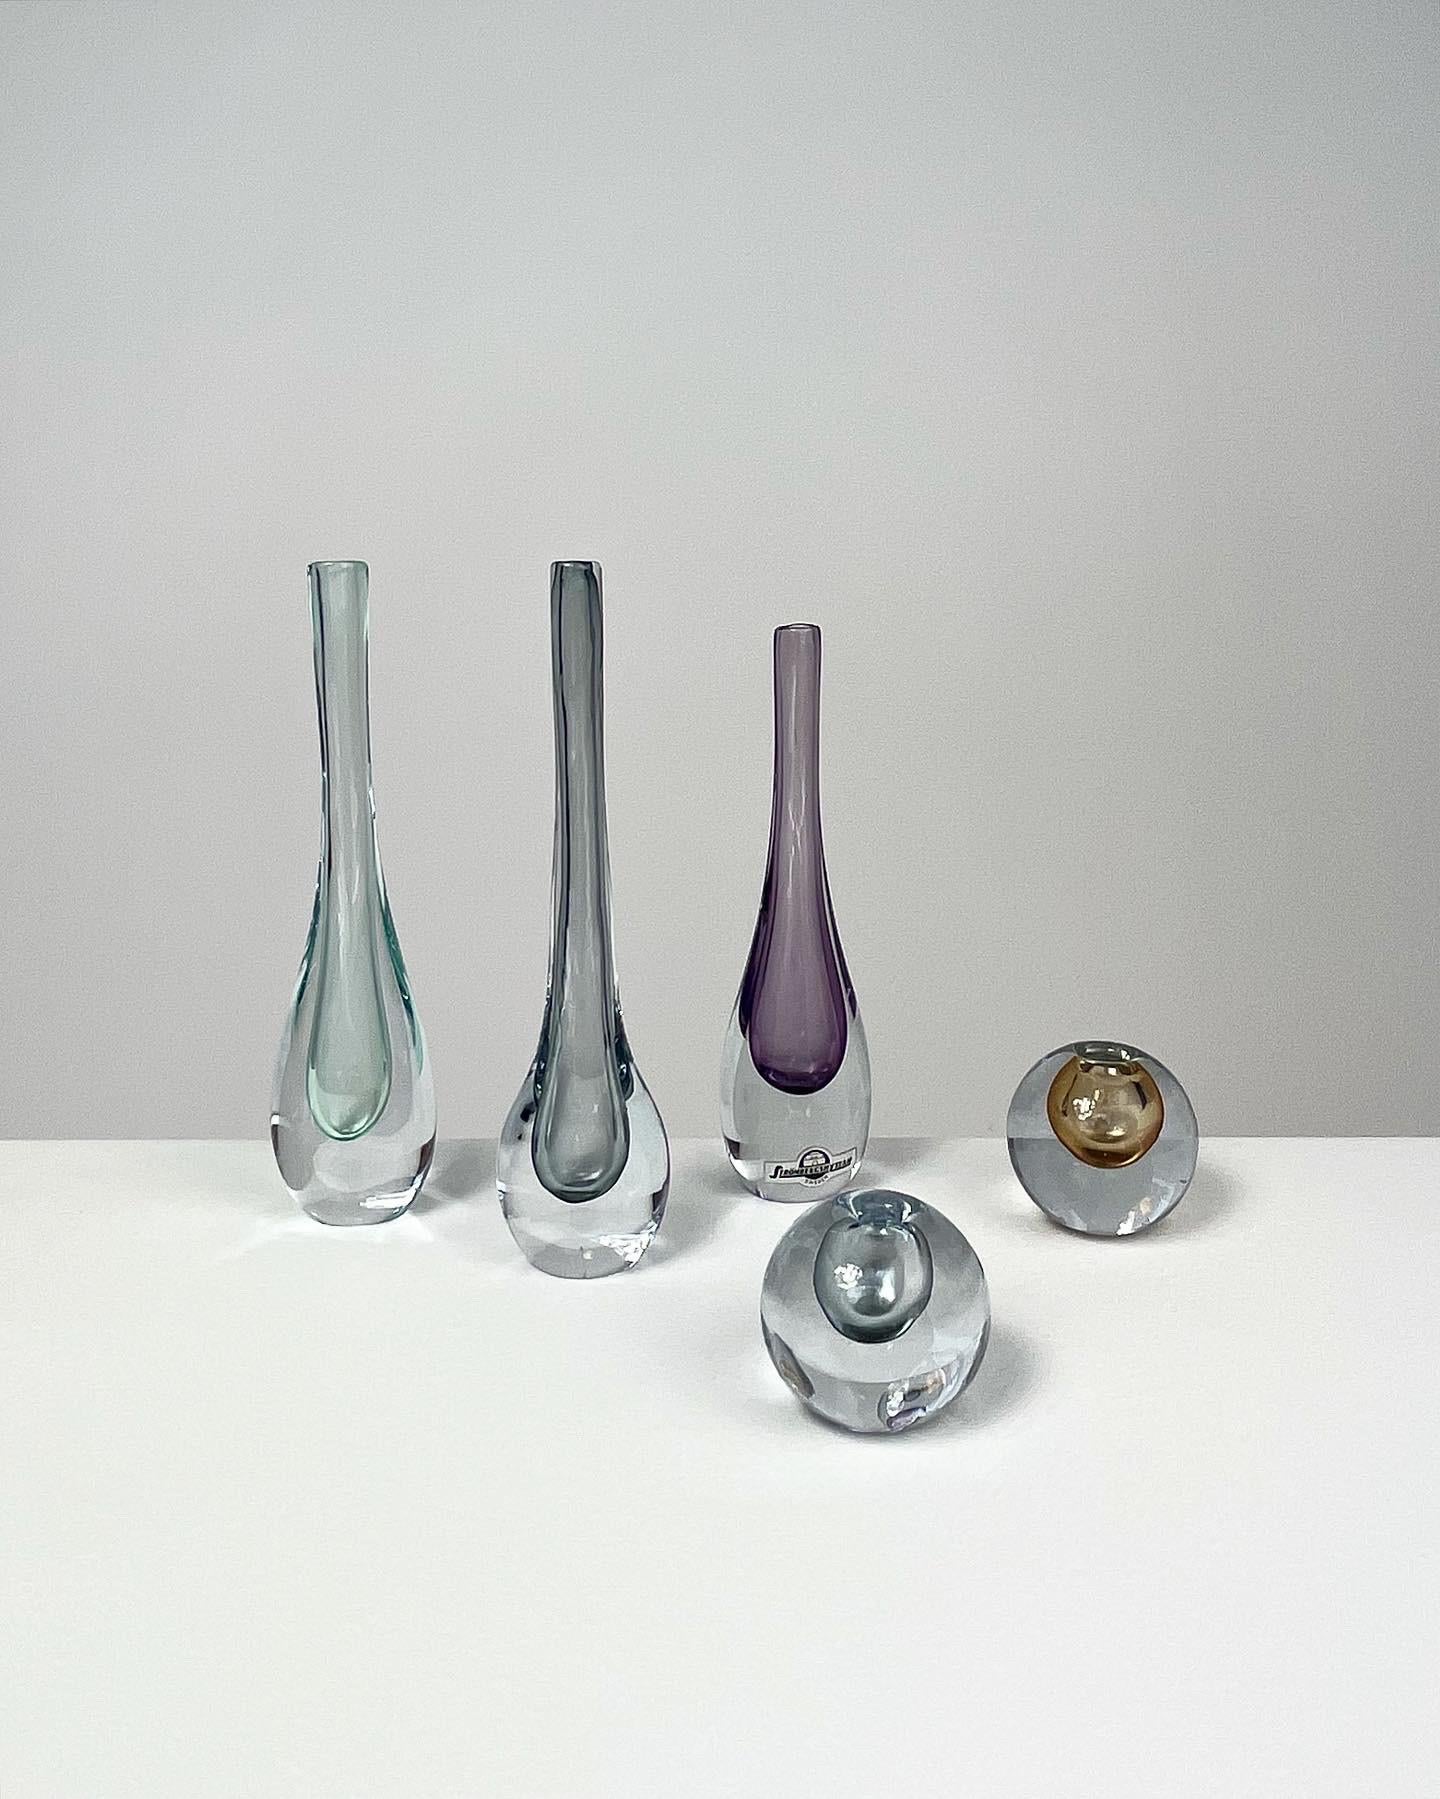 Set of five miniature vases by Asta Strömberg & Gunnar Nylund for Strömbergshyttan glass factory in the late 1950s-early 1960s.

Height: 3.5 cm, 4 cm, 13.5 cm, 14.2 cm, 14.5 cm

The amber ball vase is signed underneath, the light purple remains the